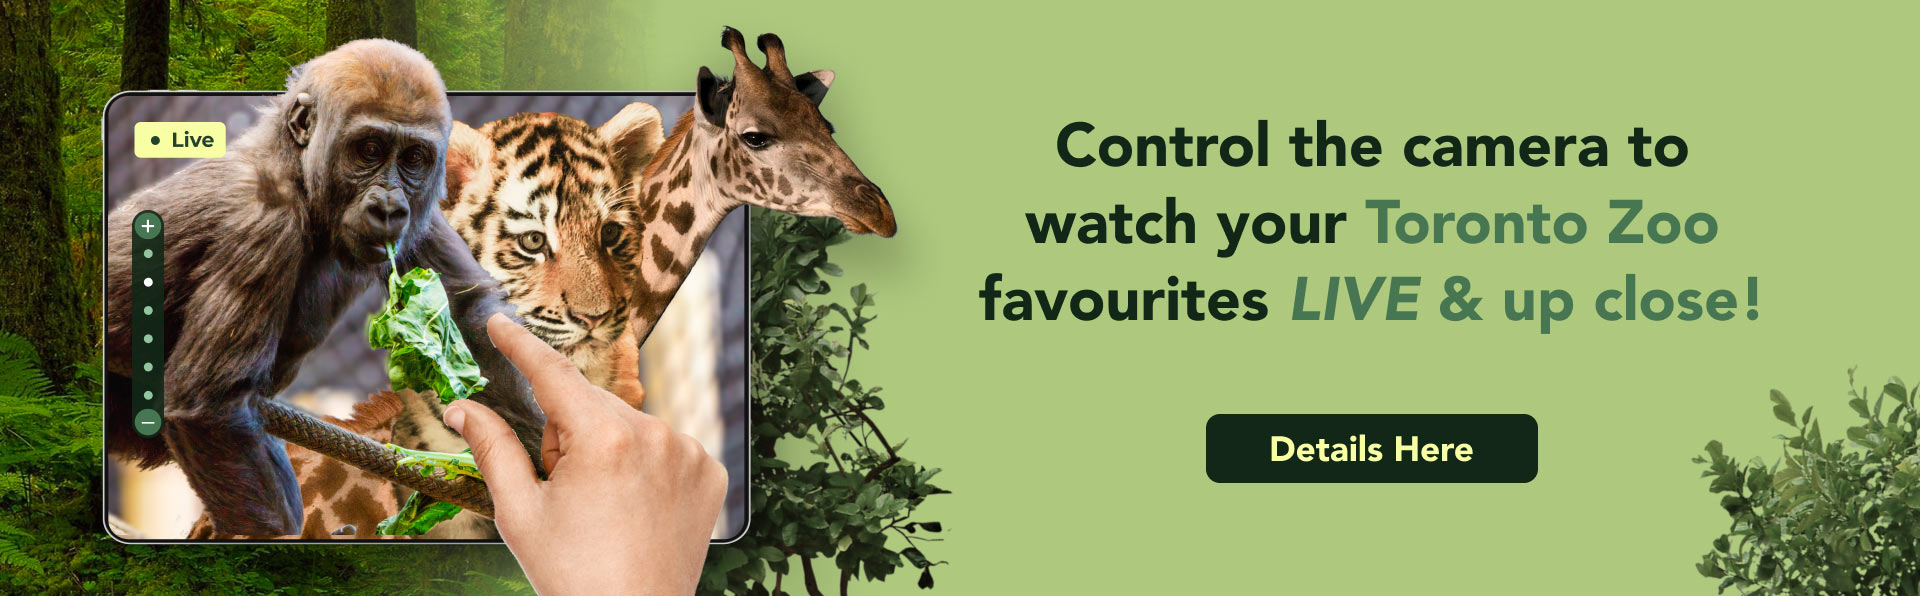 Control the camera to watch your Toronto Zoo favorites live and up close!